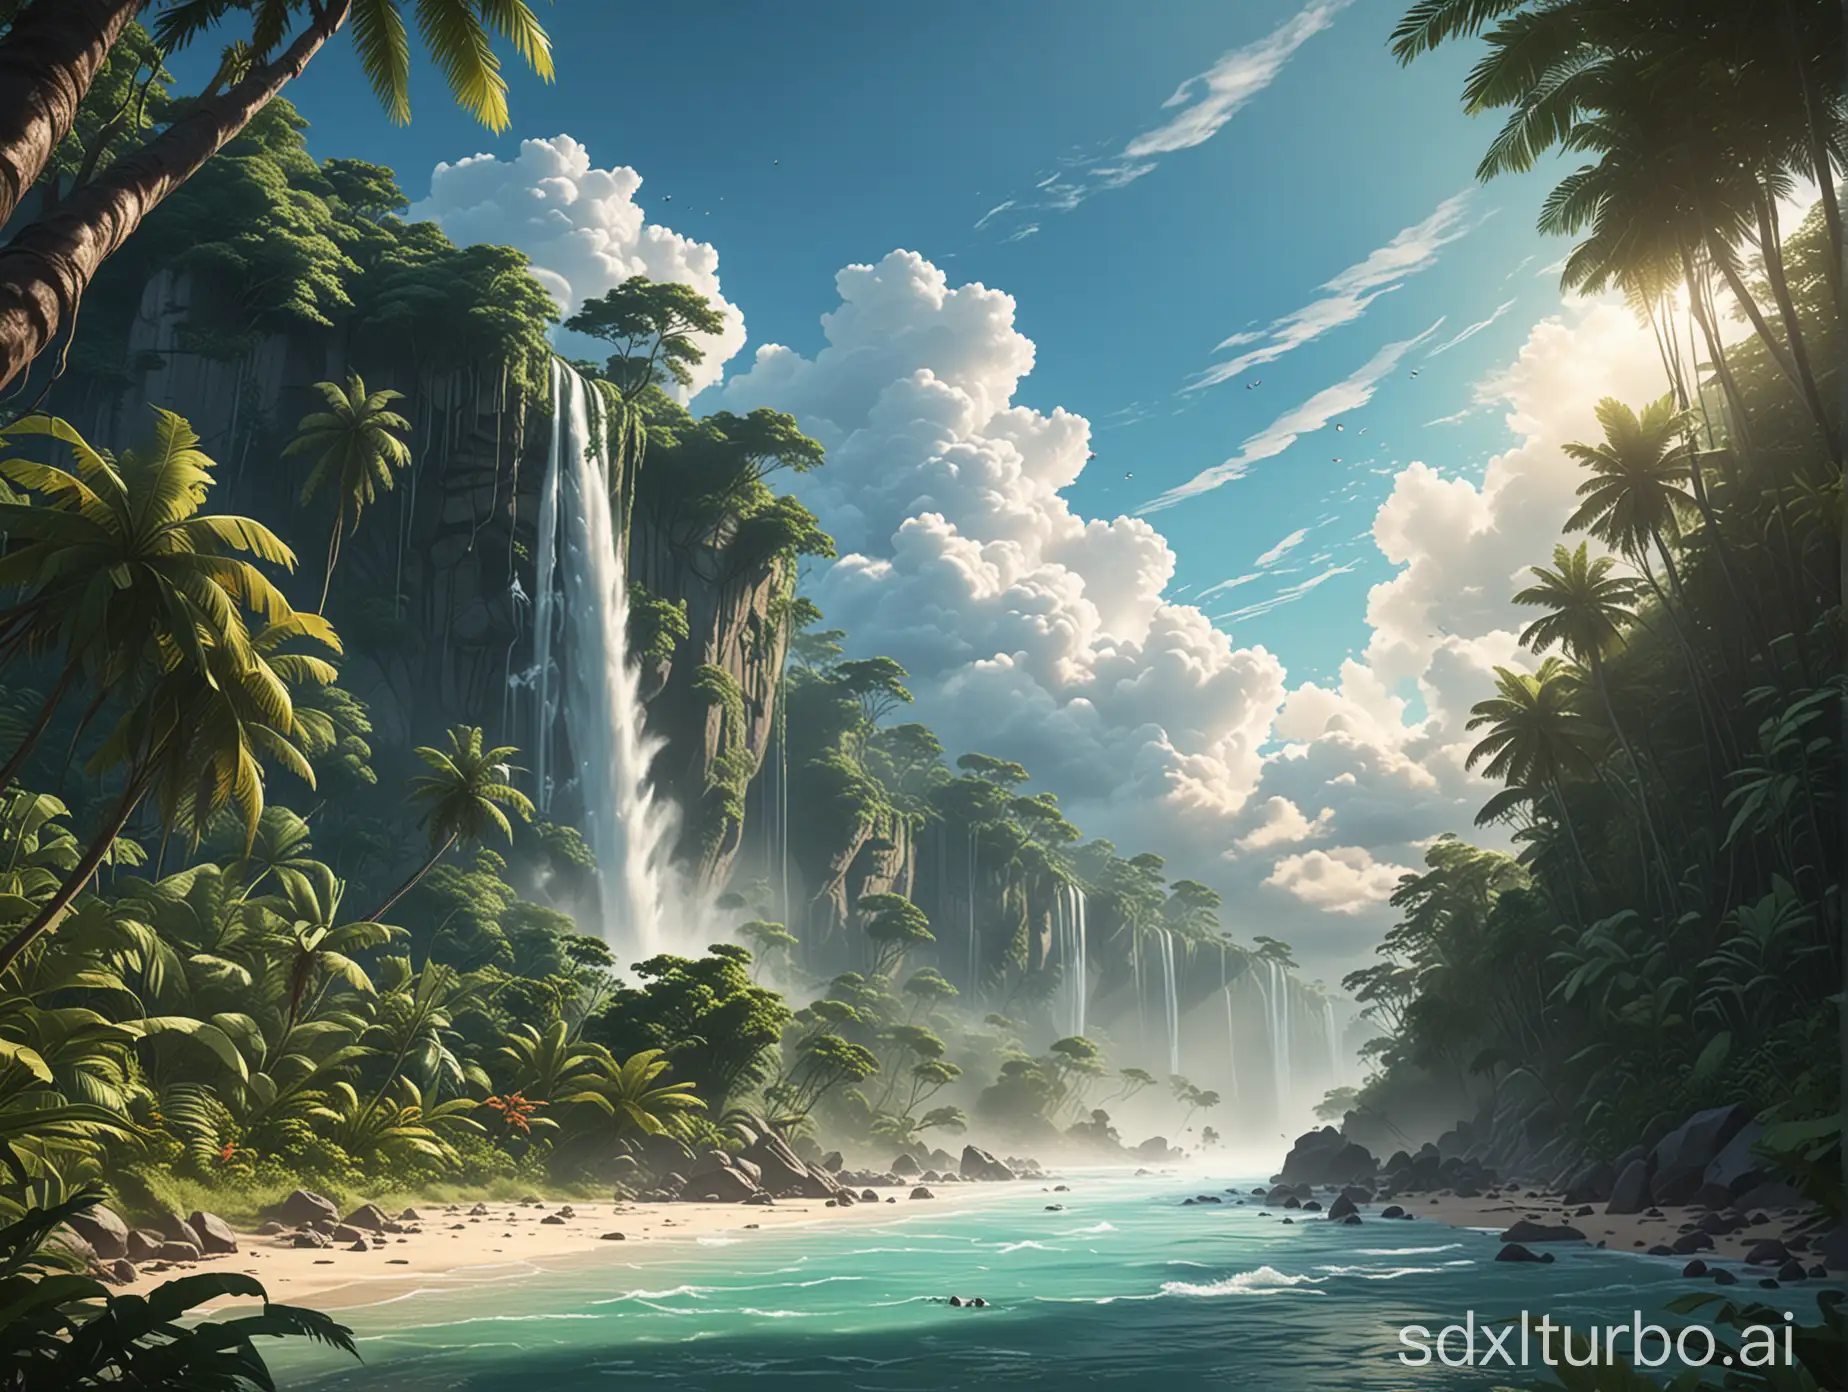 Flat color anime illustration, best cinematic realistic quality, global illumination, narrow partially sunlit jungle, distant beach, vapor trails and clouds in sky, masterpiece, trending, low angle, maximalist details, jungle, water fall